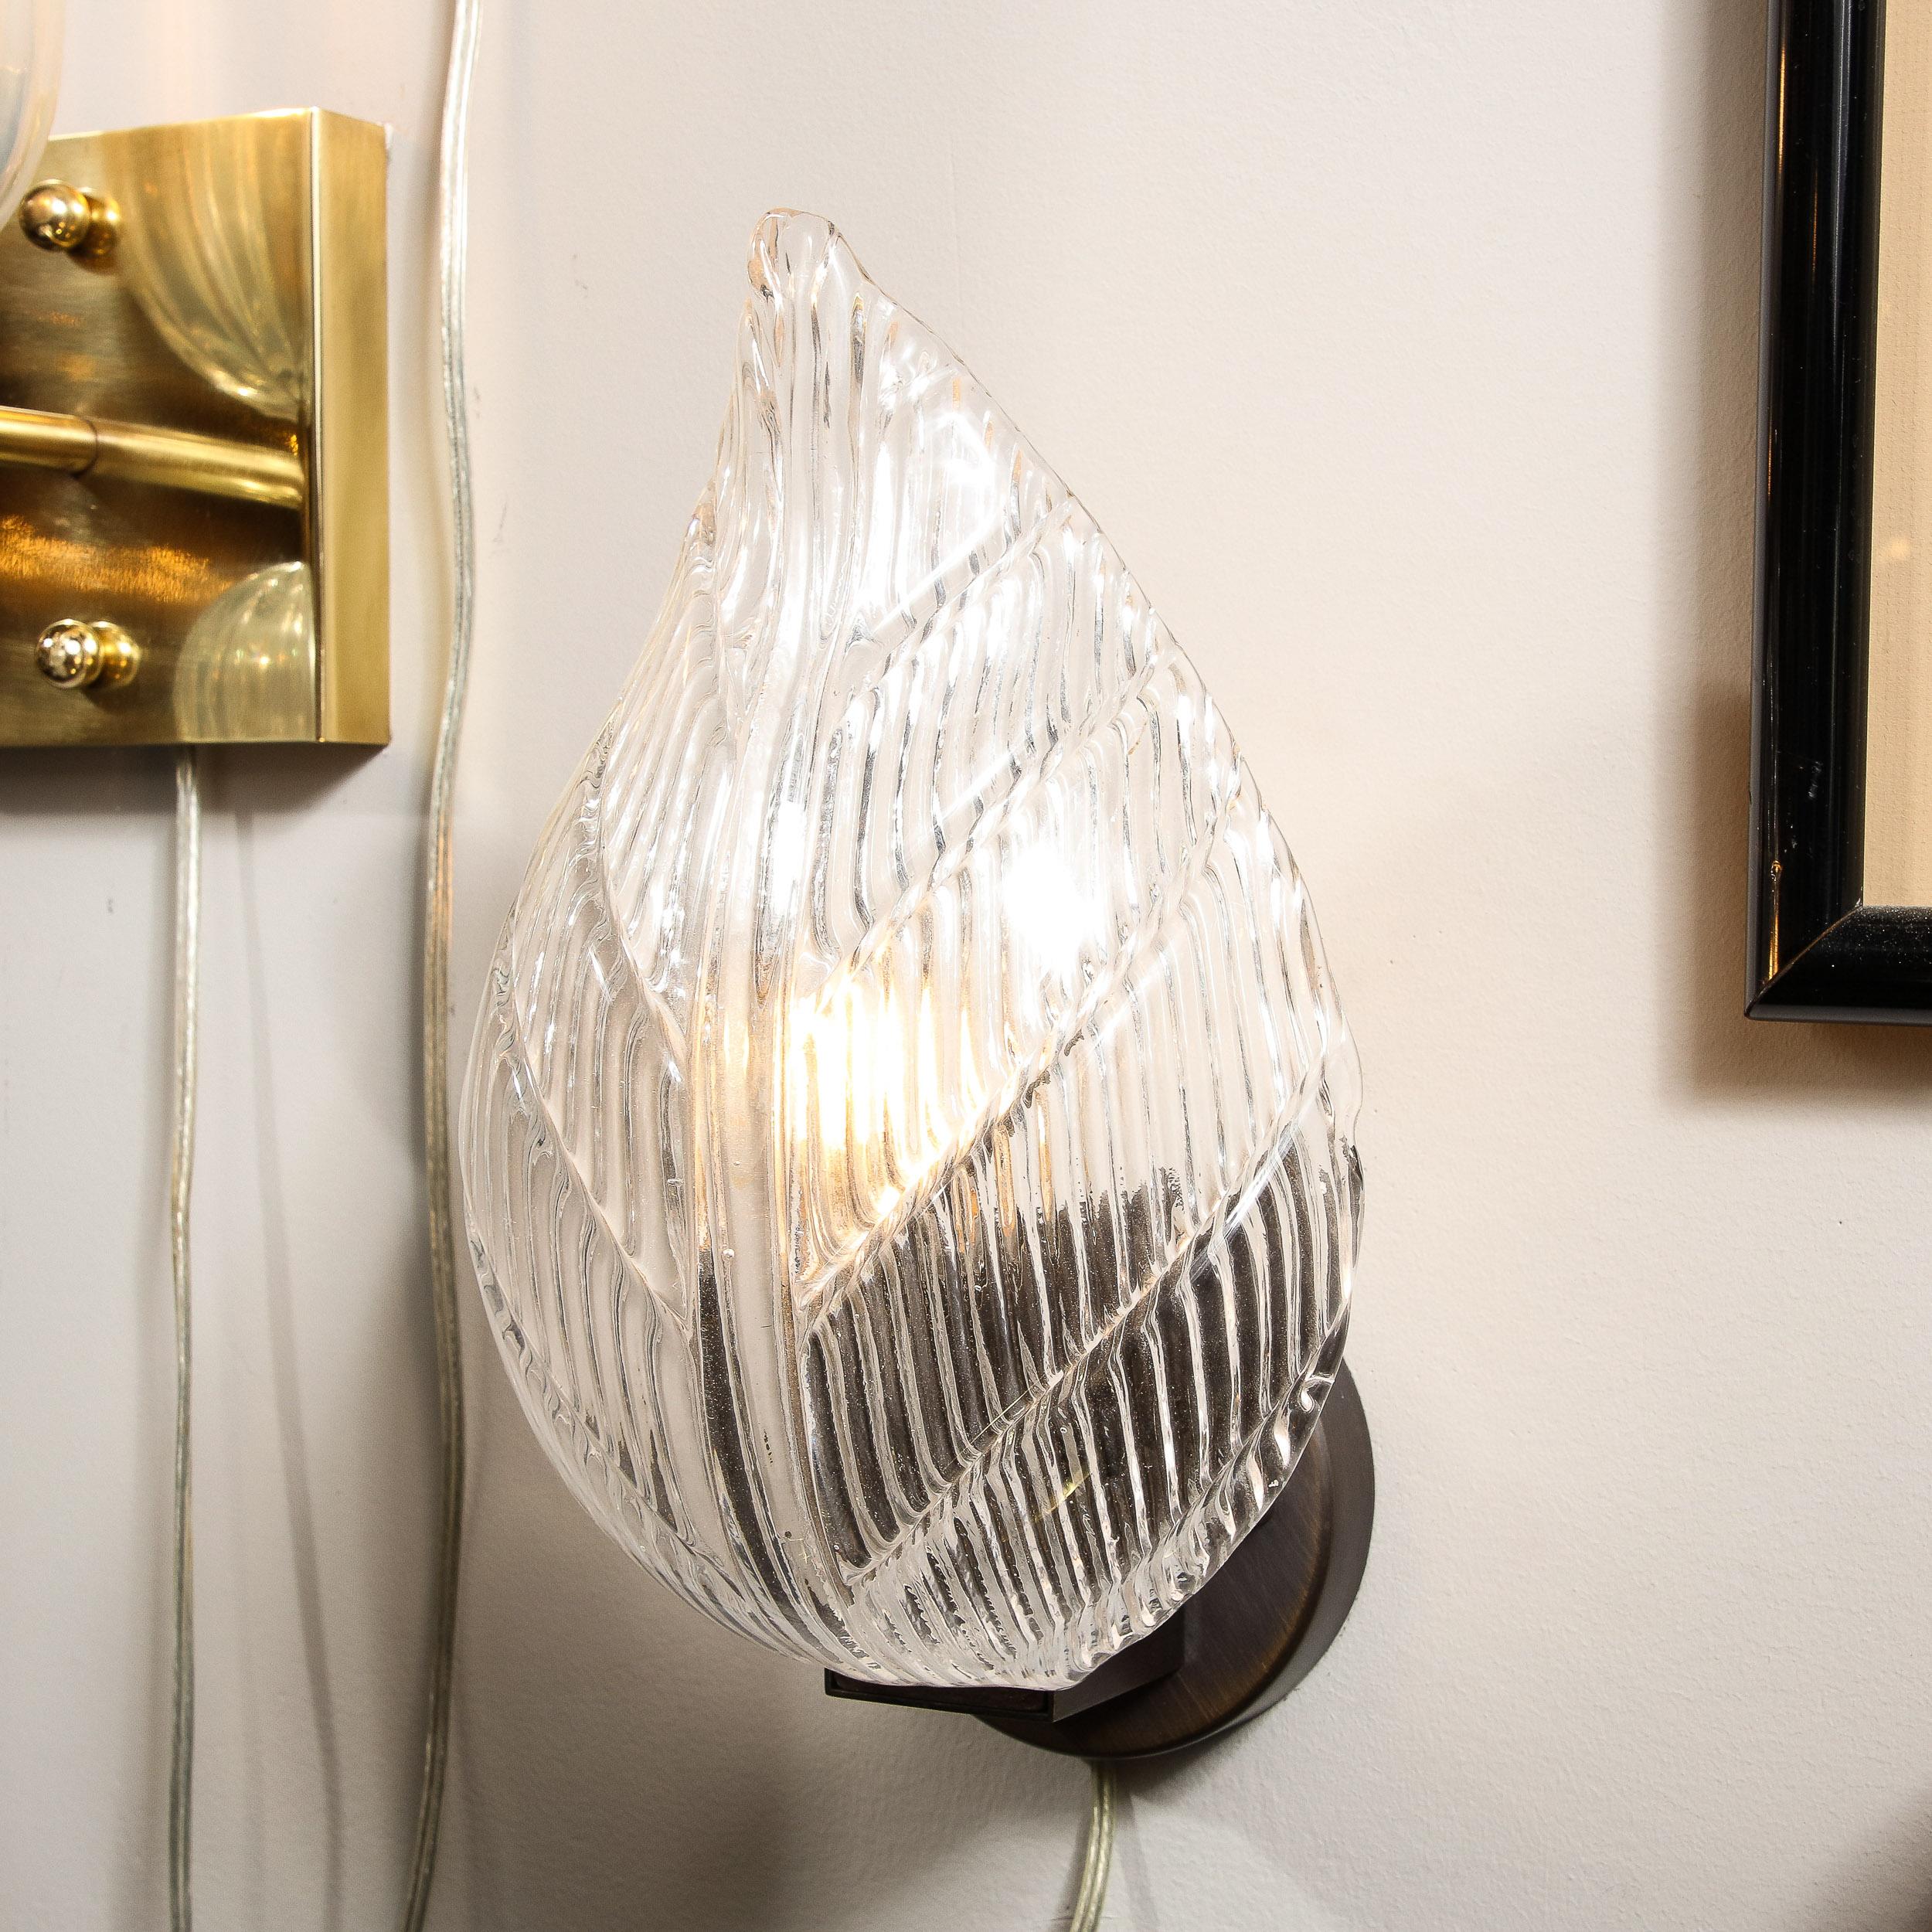 Modernist Handblown Murano Leaf Form Sconce in Transparent Reeded Glass In Excellent Condition For Sale In New York, NY